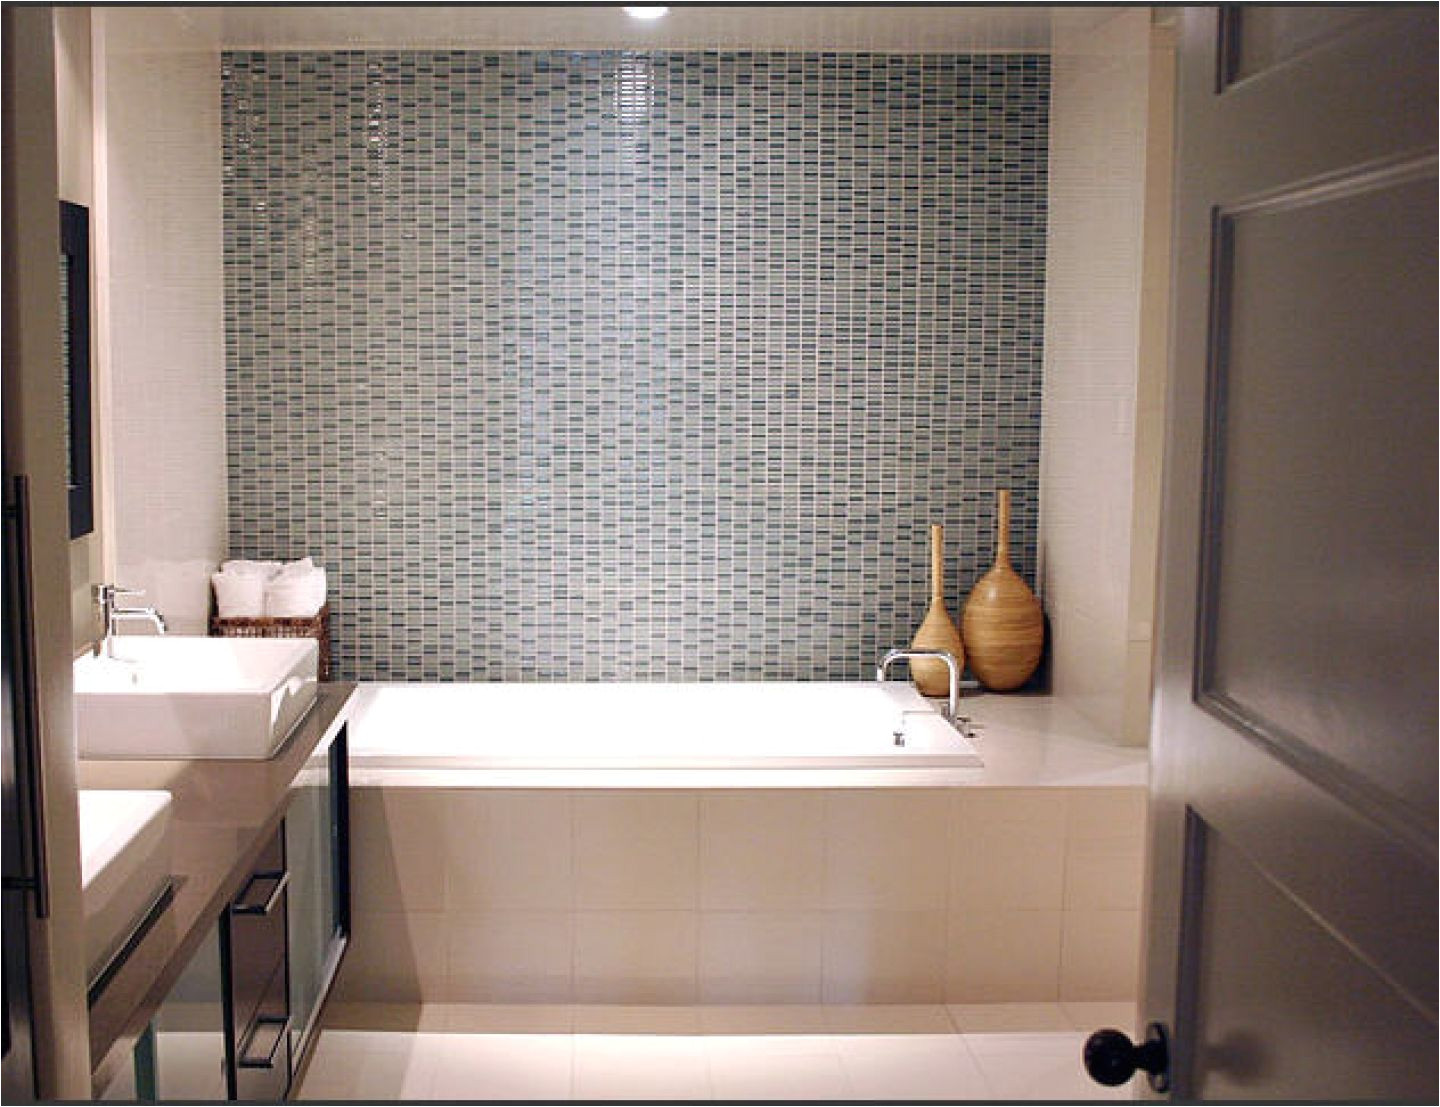 simply chic bathroom tile design ideas tile is often the most used material in the bathroom so choosing the right one is an easy way to kick up your bath